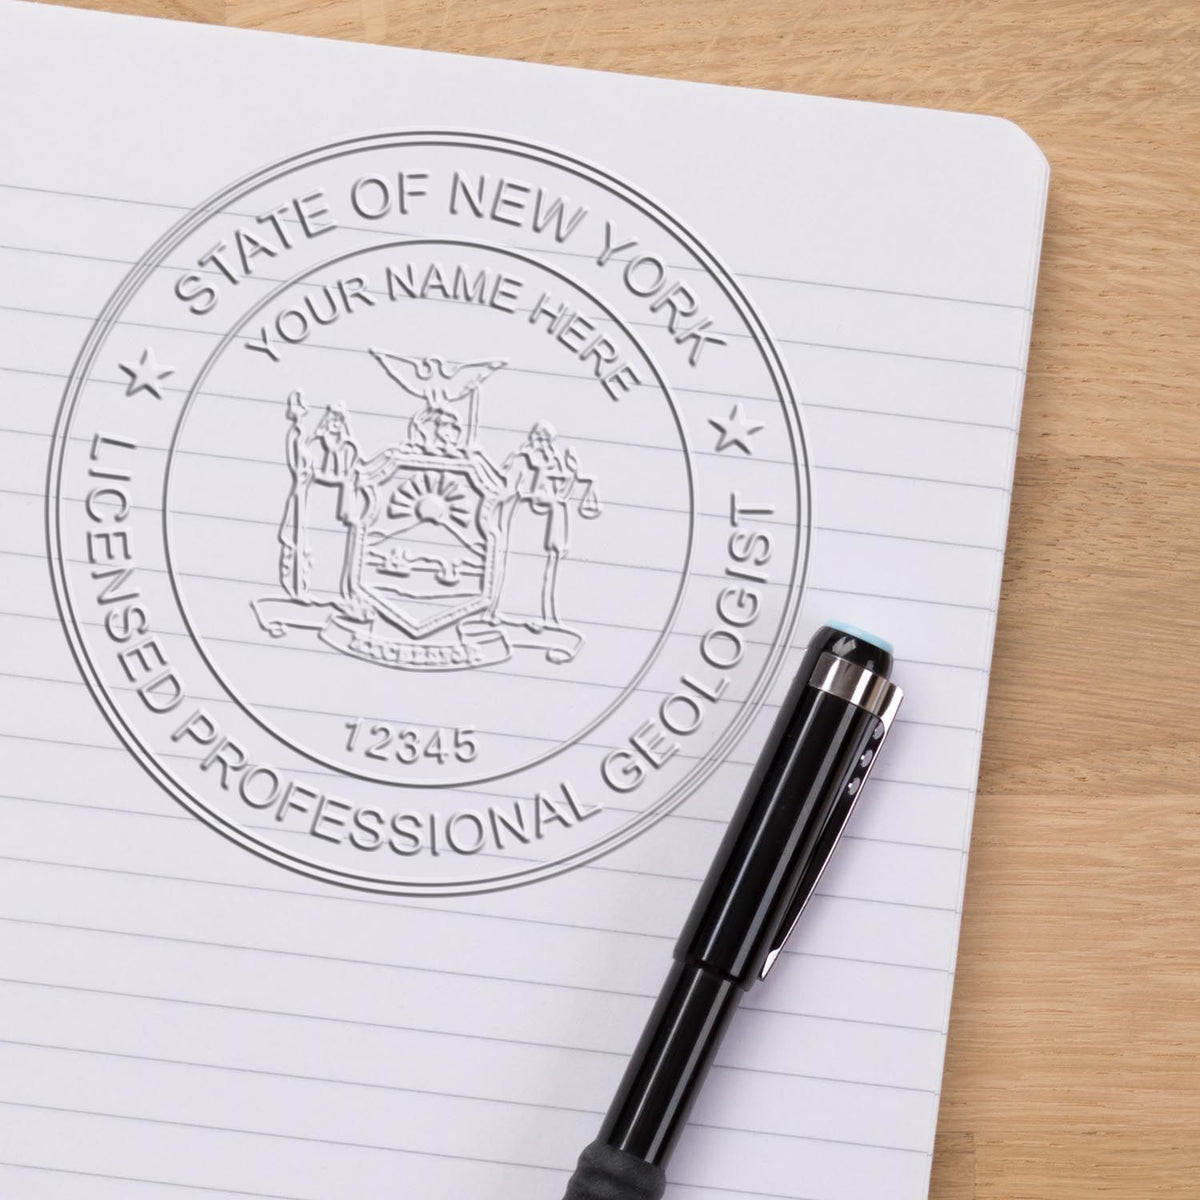 A stamped imprint of the New York Geologist Desk Seal in this stylish lifestyle photo, setting the tone for a unique and personalized product.